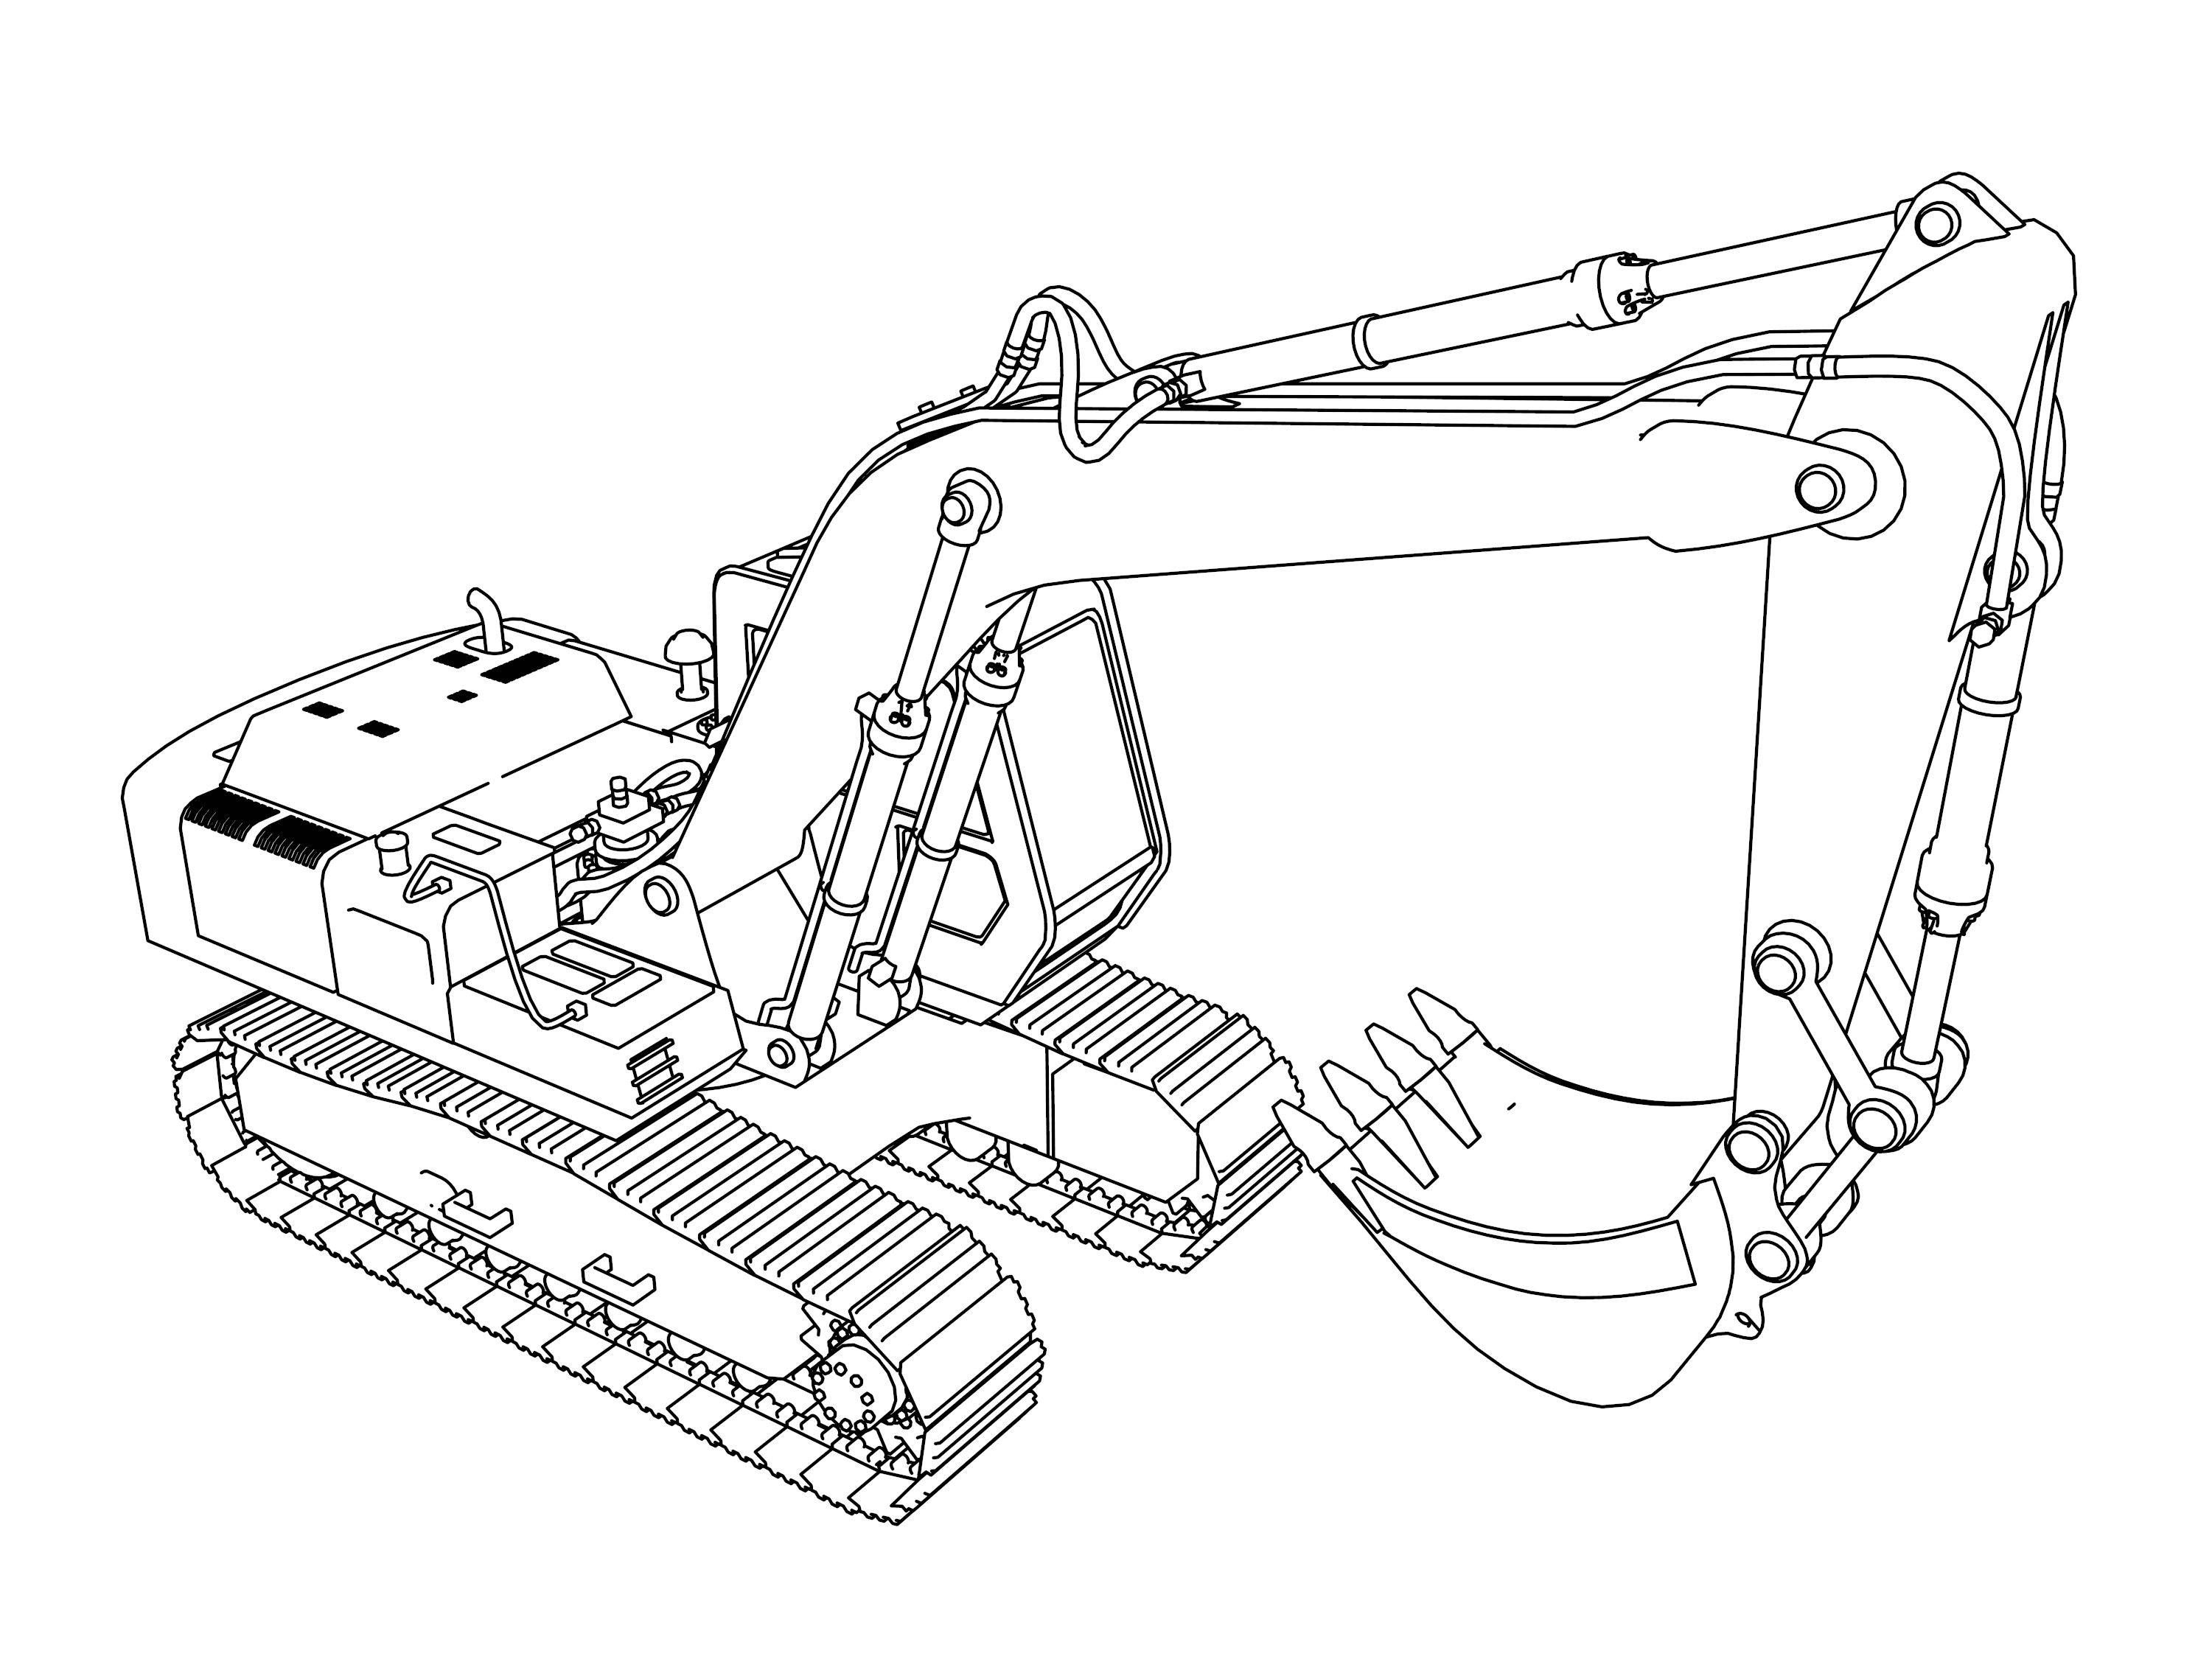 Excavator Coloring Pages | Coloring pages, Tractor coloring ...